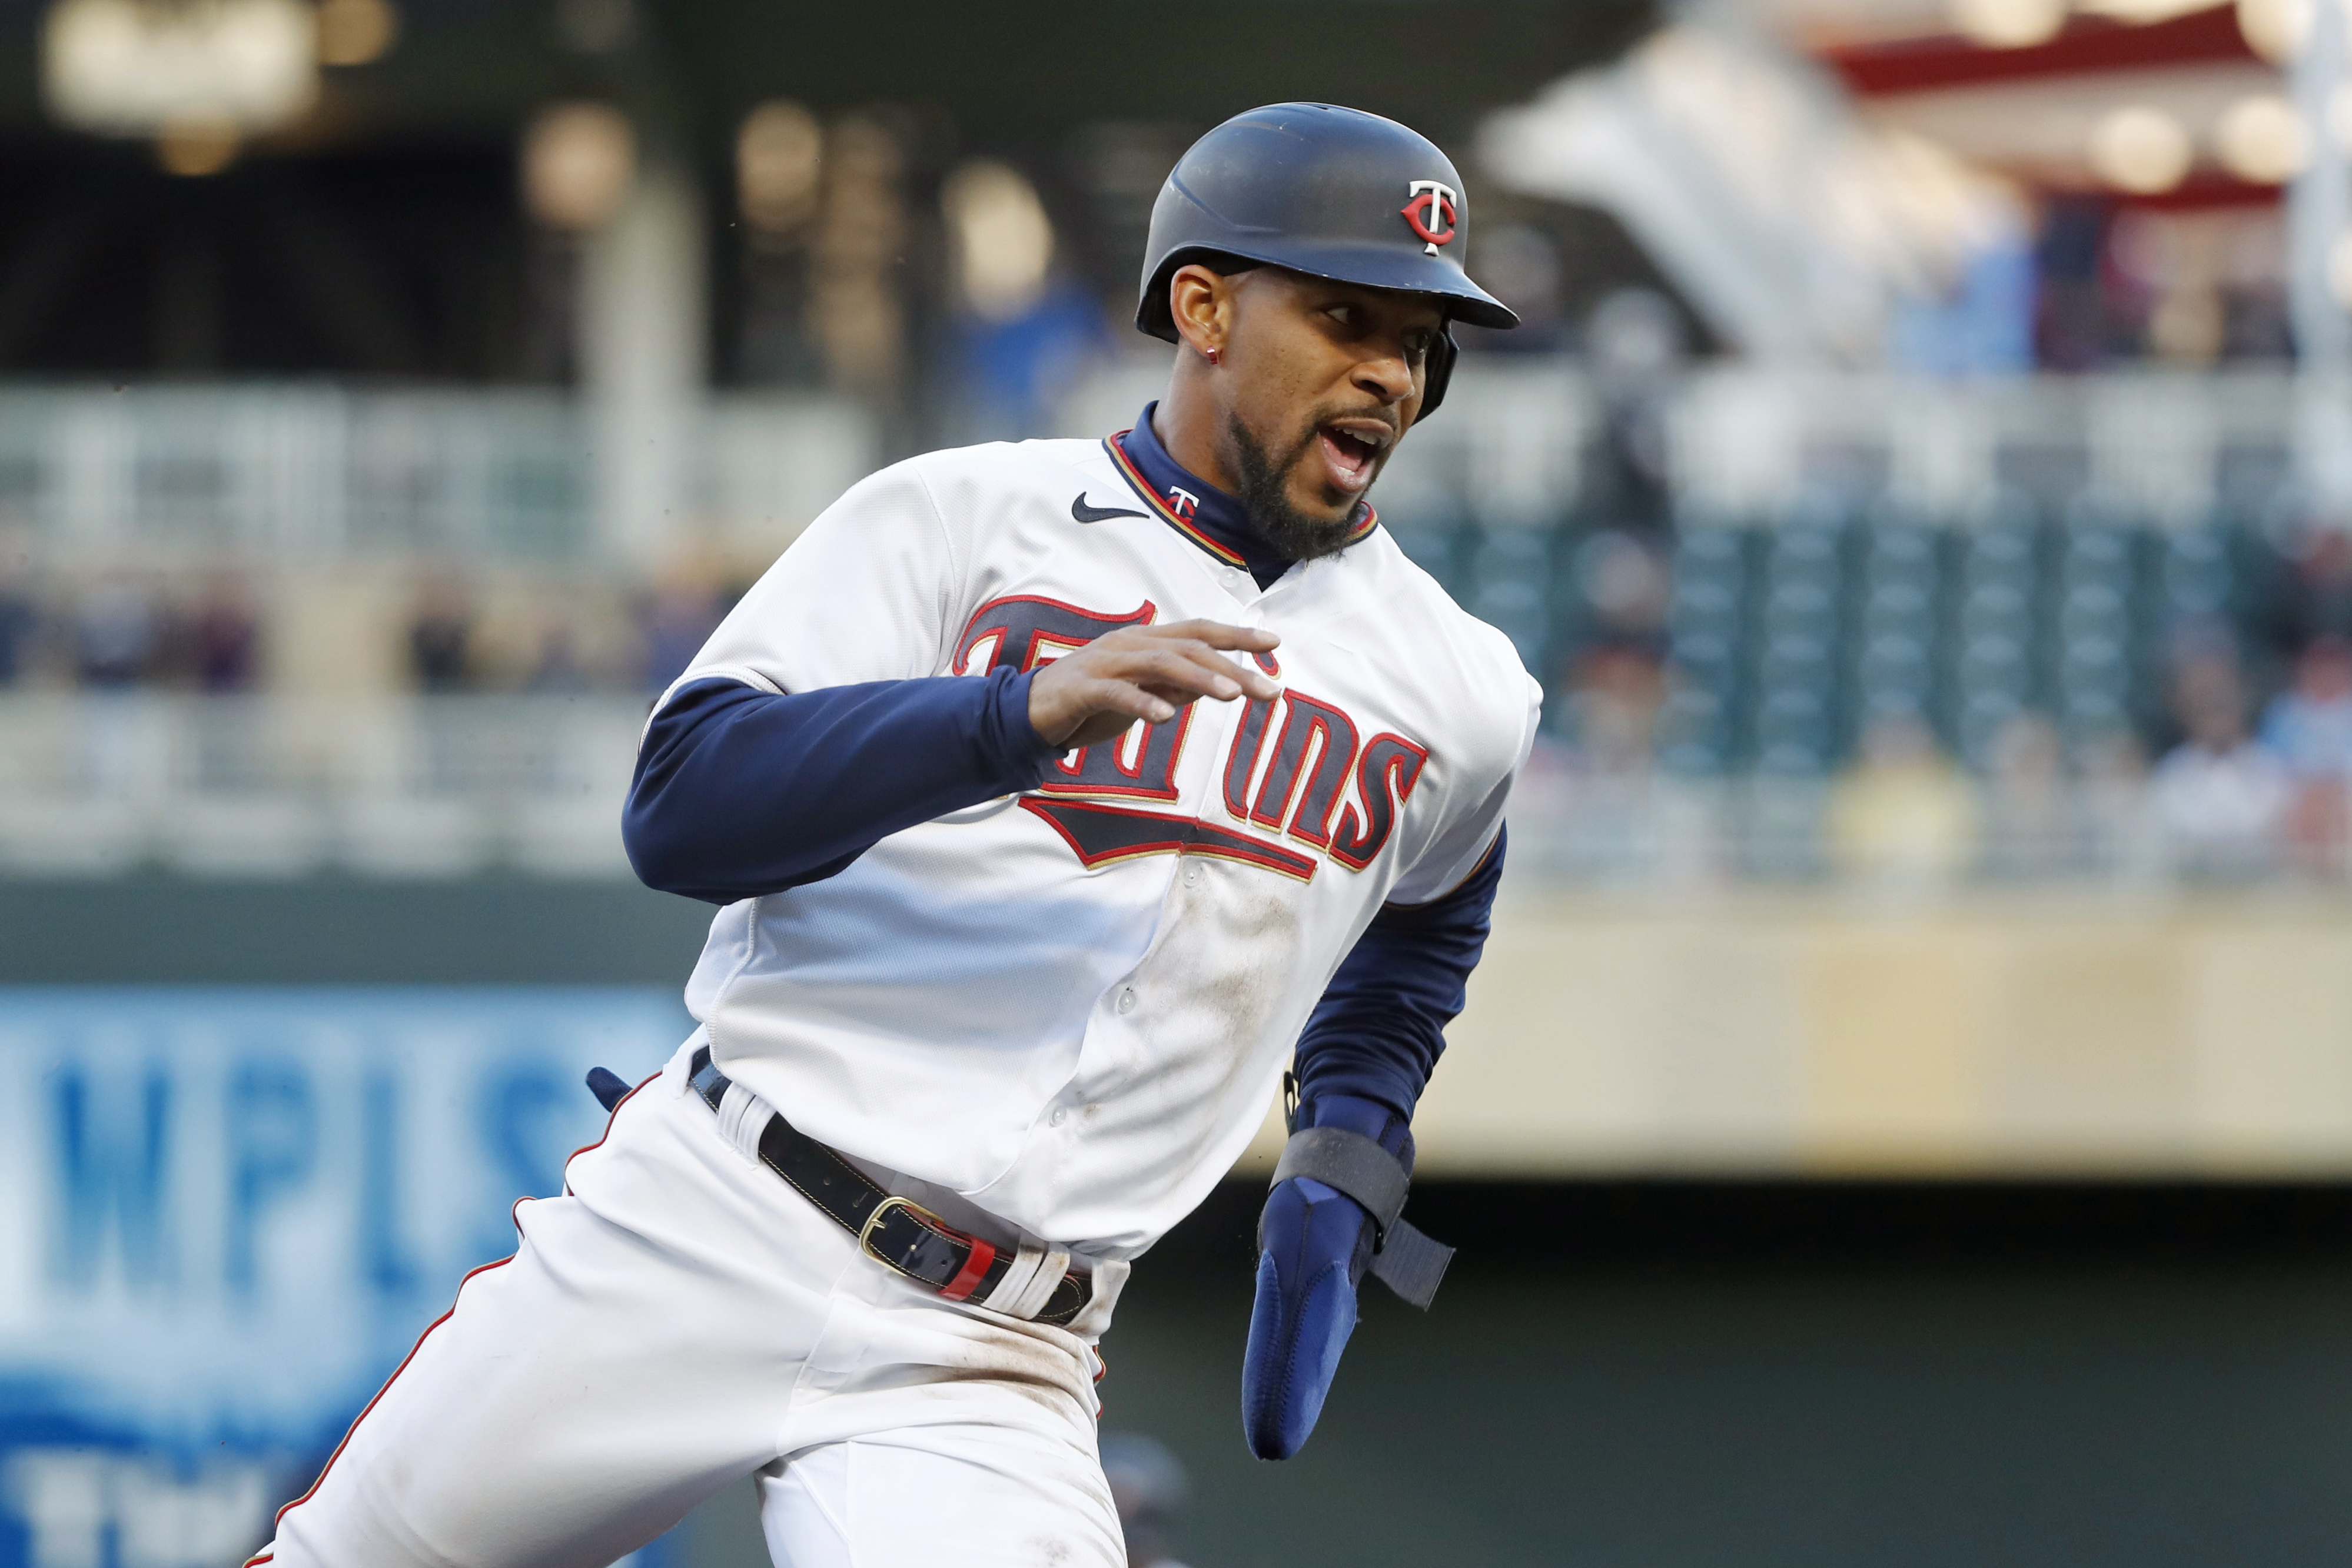 Report: Twins' Byron Buxton Likely out a Week with Knee Injury; No